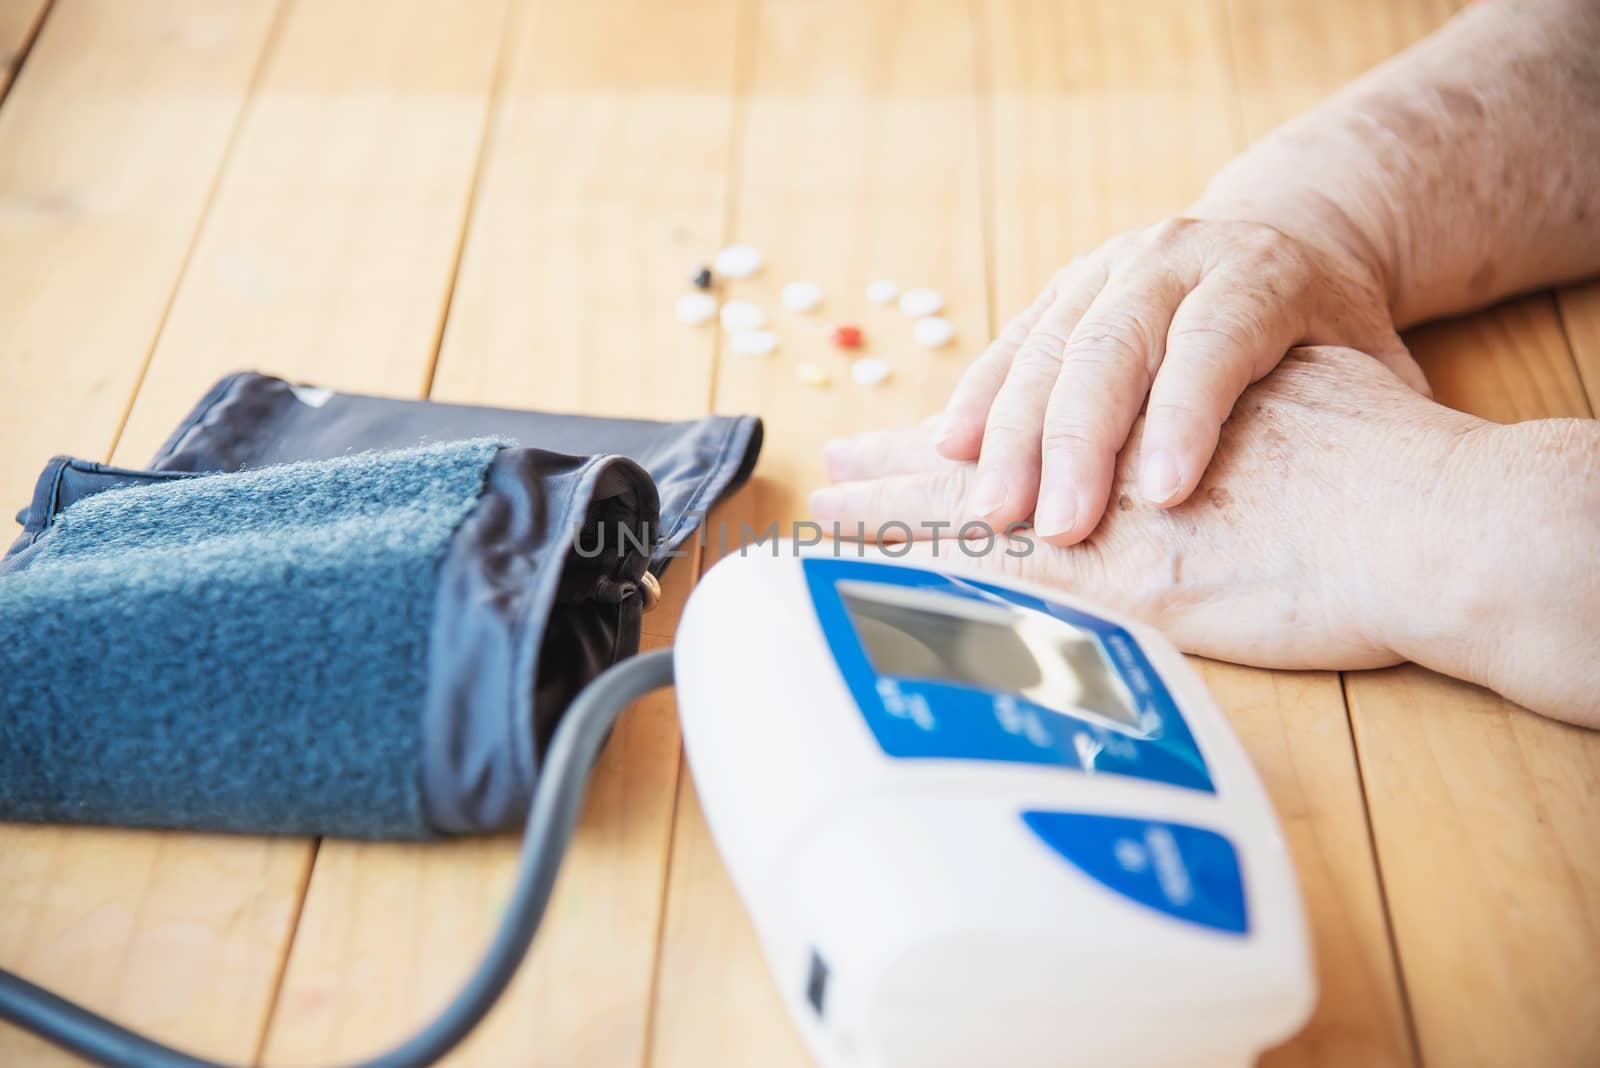 Old lady is being checked blood pressure using blood pressure monitor kid set - people with health care medical instrument set concept by pairhandmade